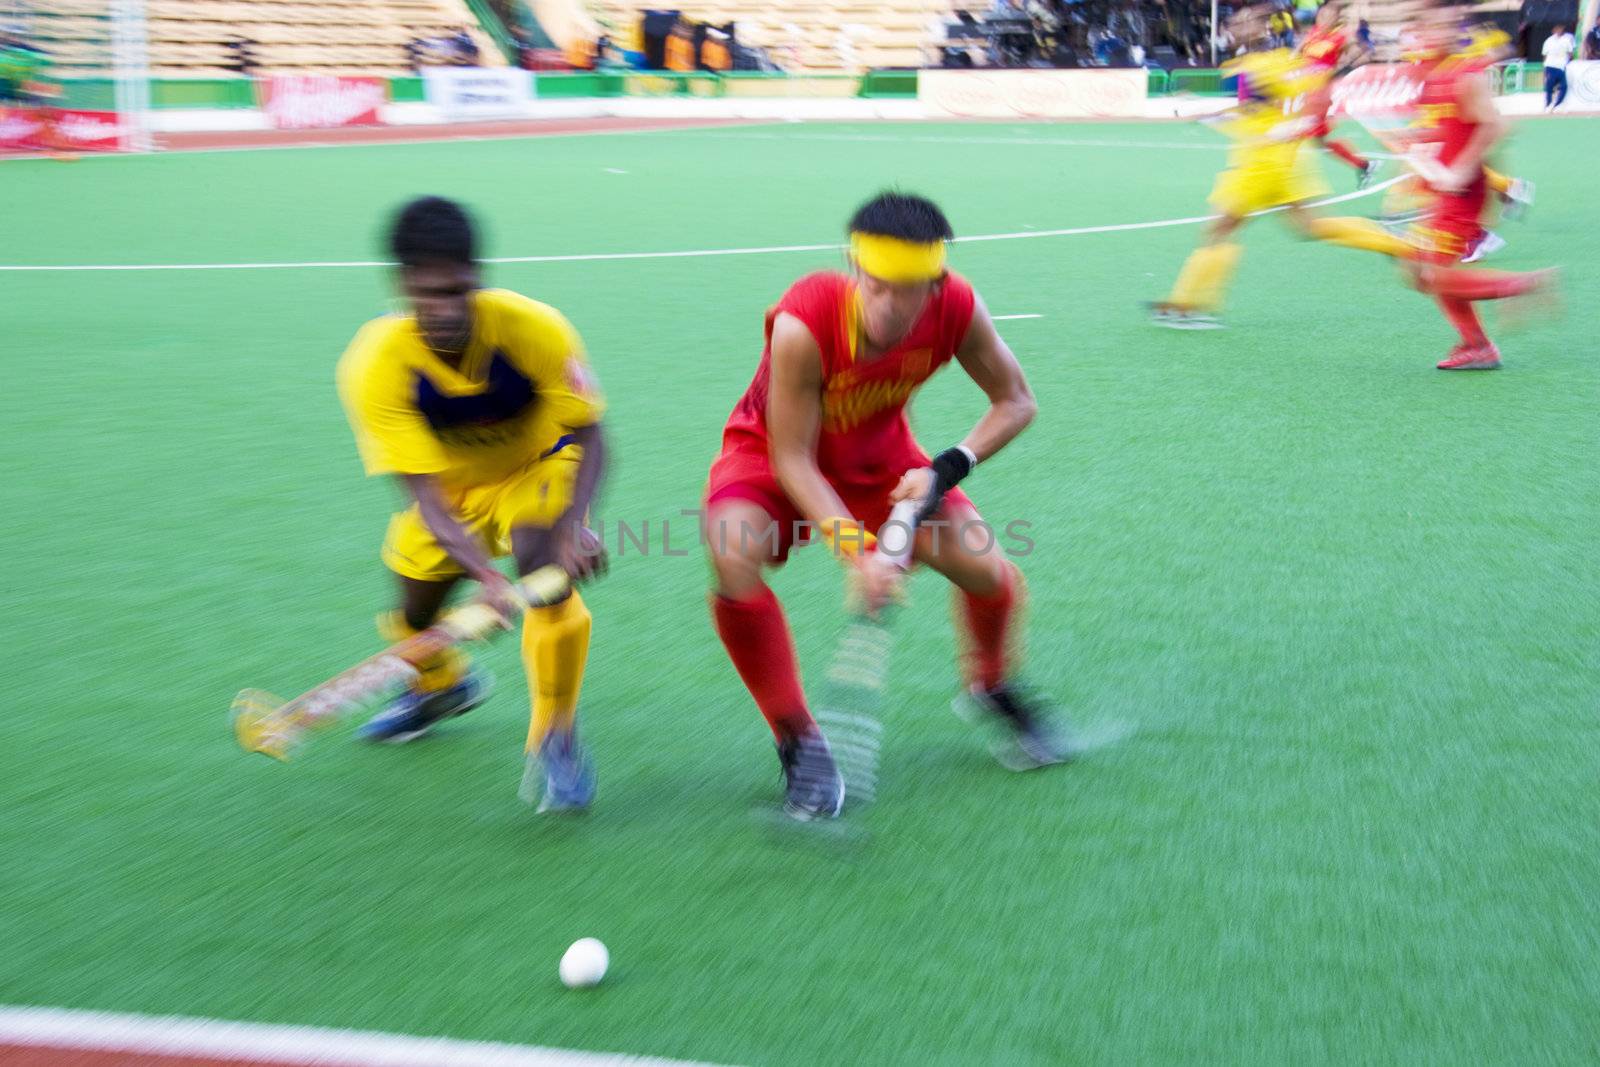 Field Hockey Action (Blurred) by shariffc